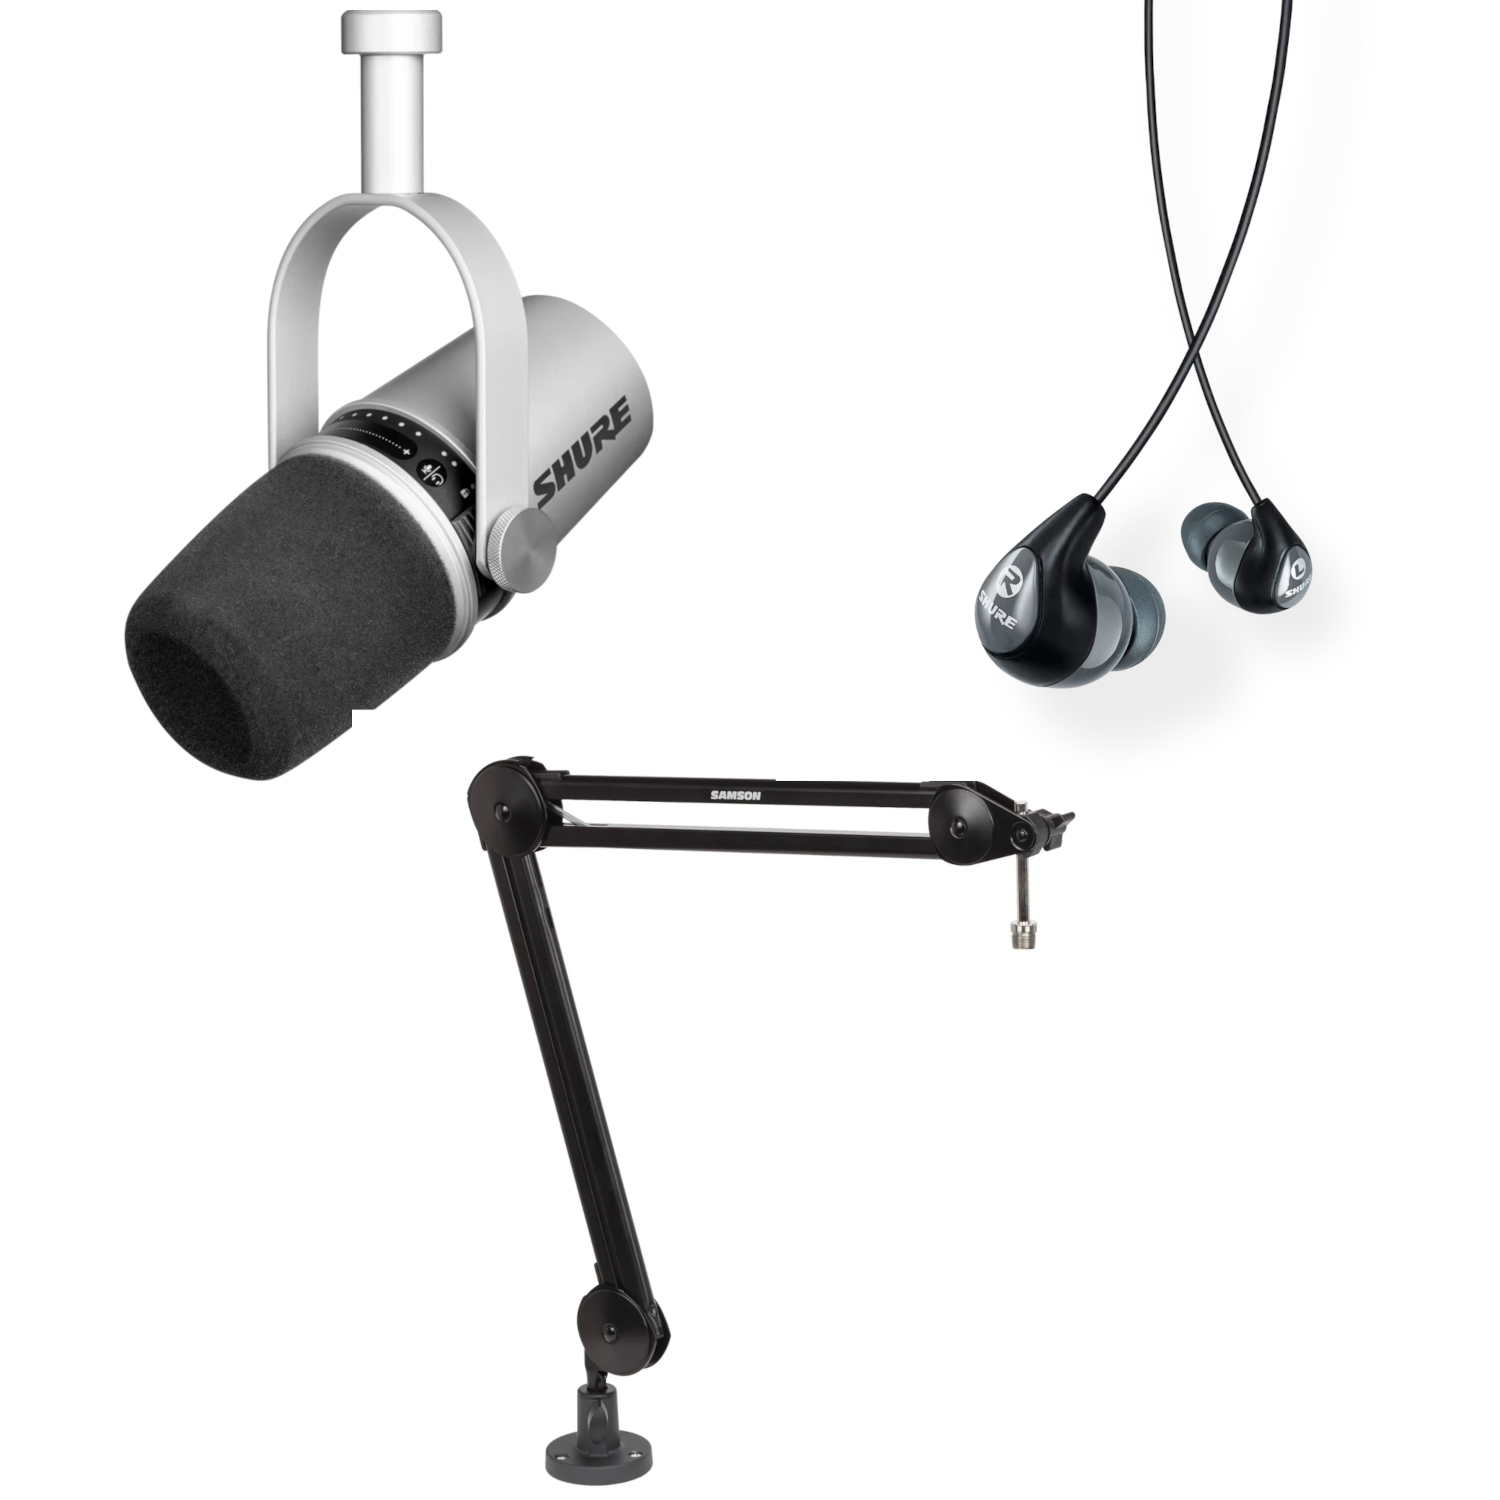 Shure MV7S Podcasting Bundle with Boom Arm and Earbuds - Silver